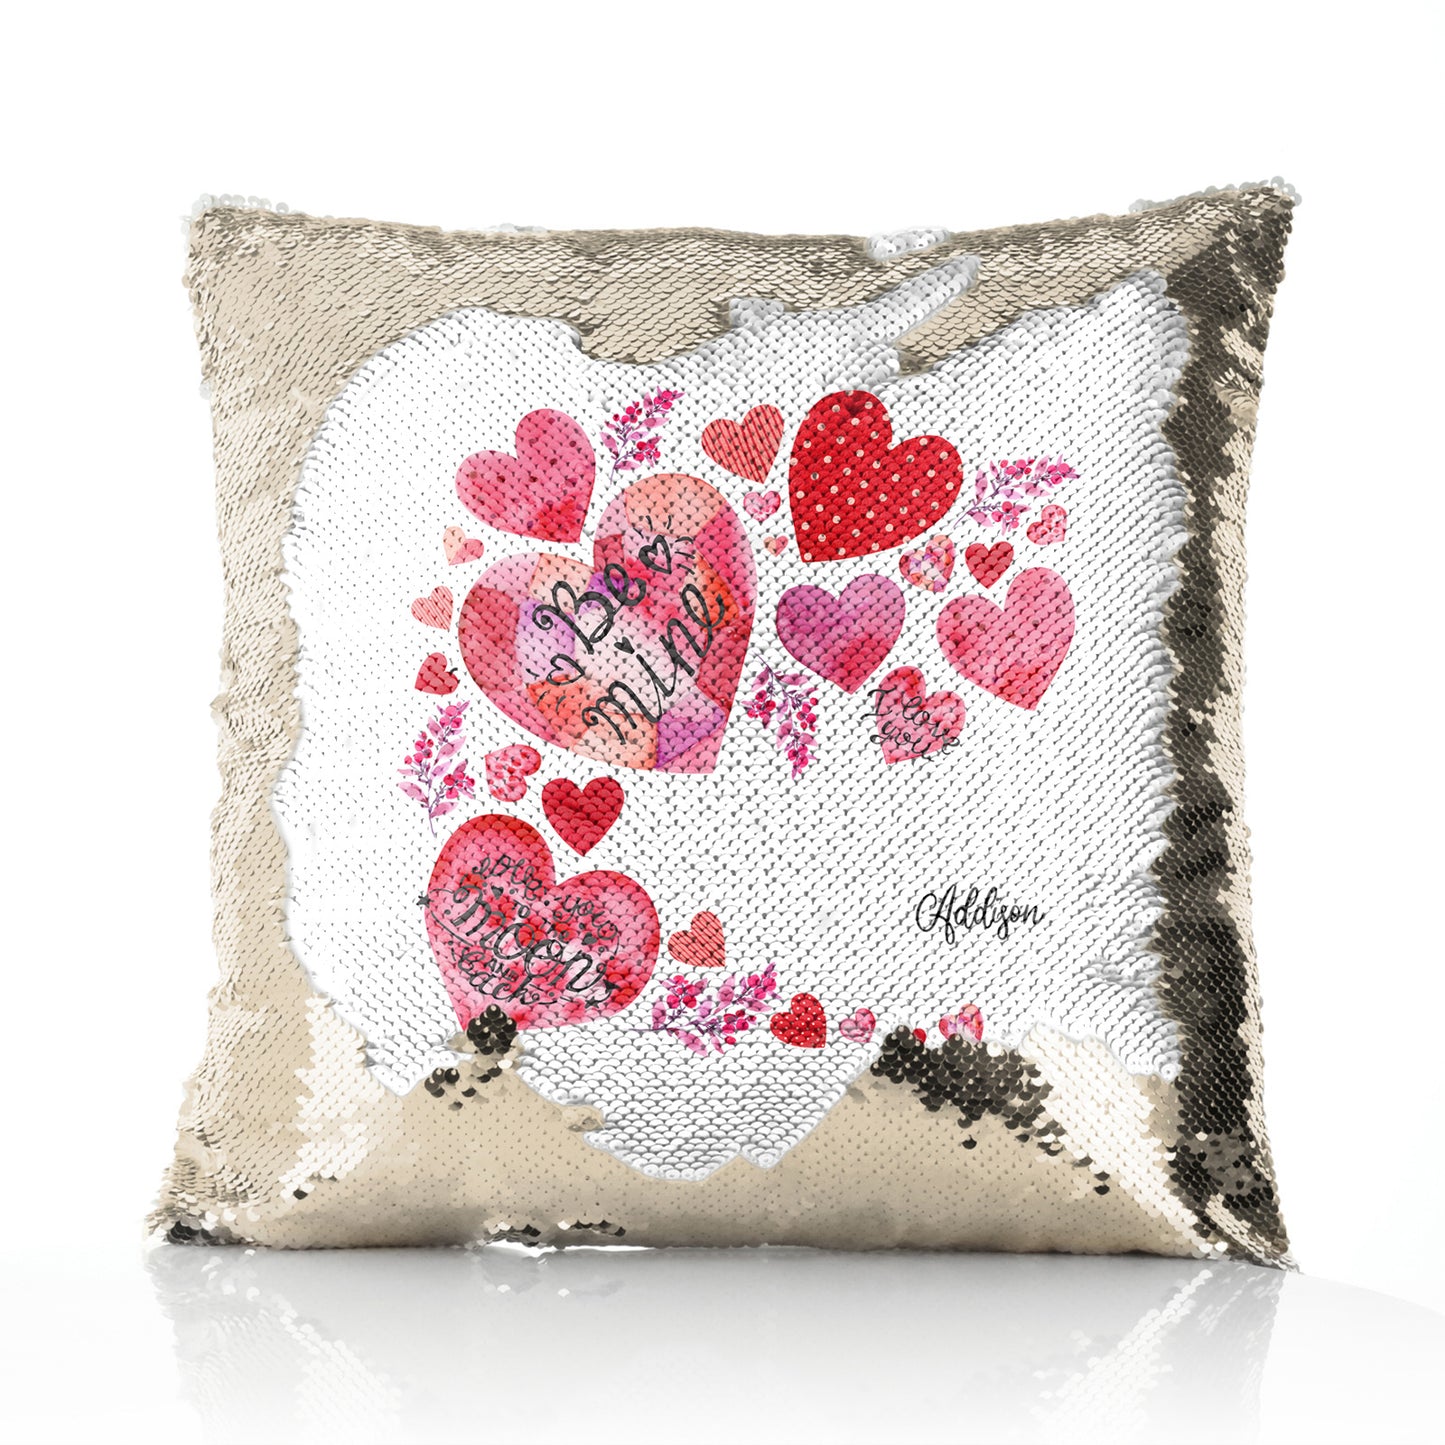 Personalised Sequin Cushion with Stylish Text and Material Hearts Love Message Print